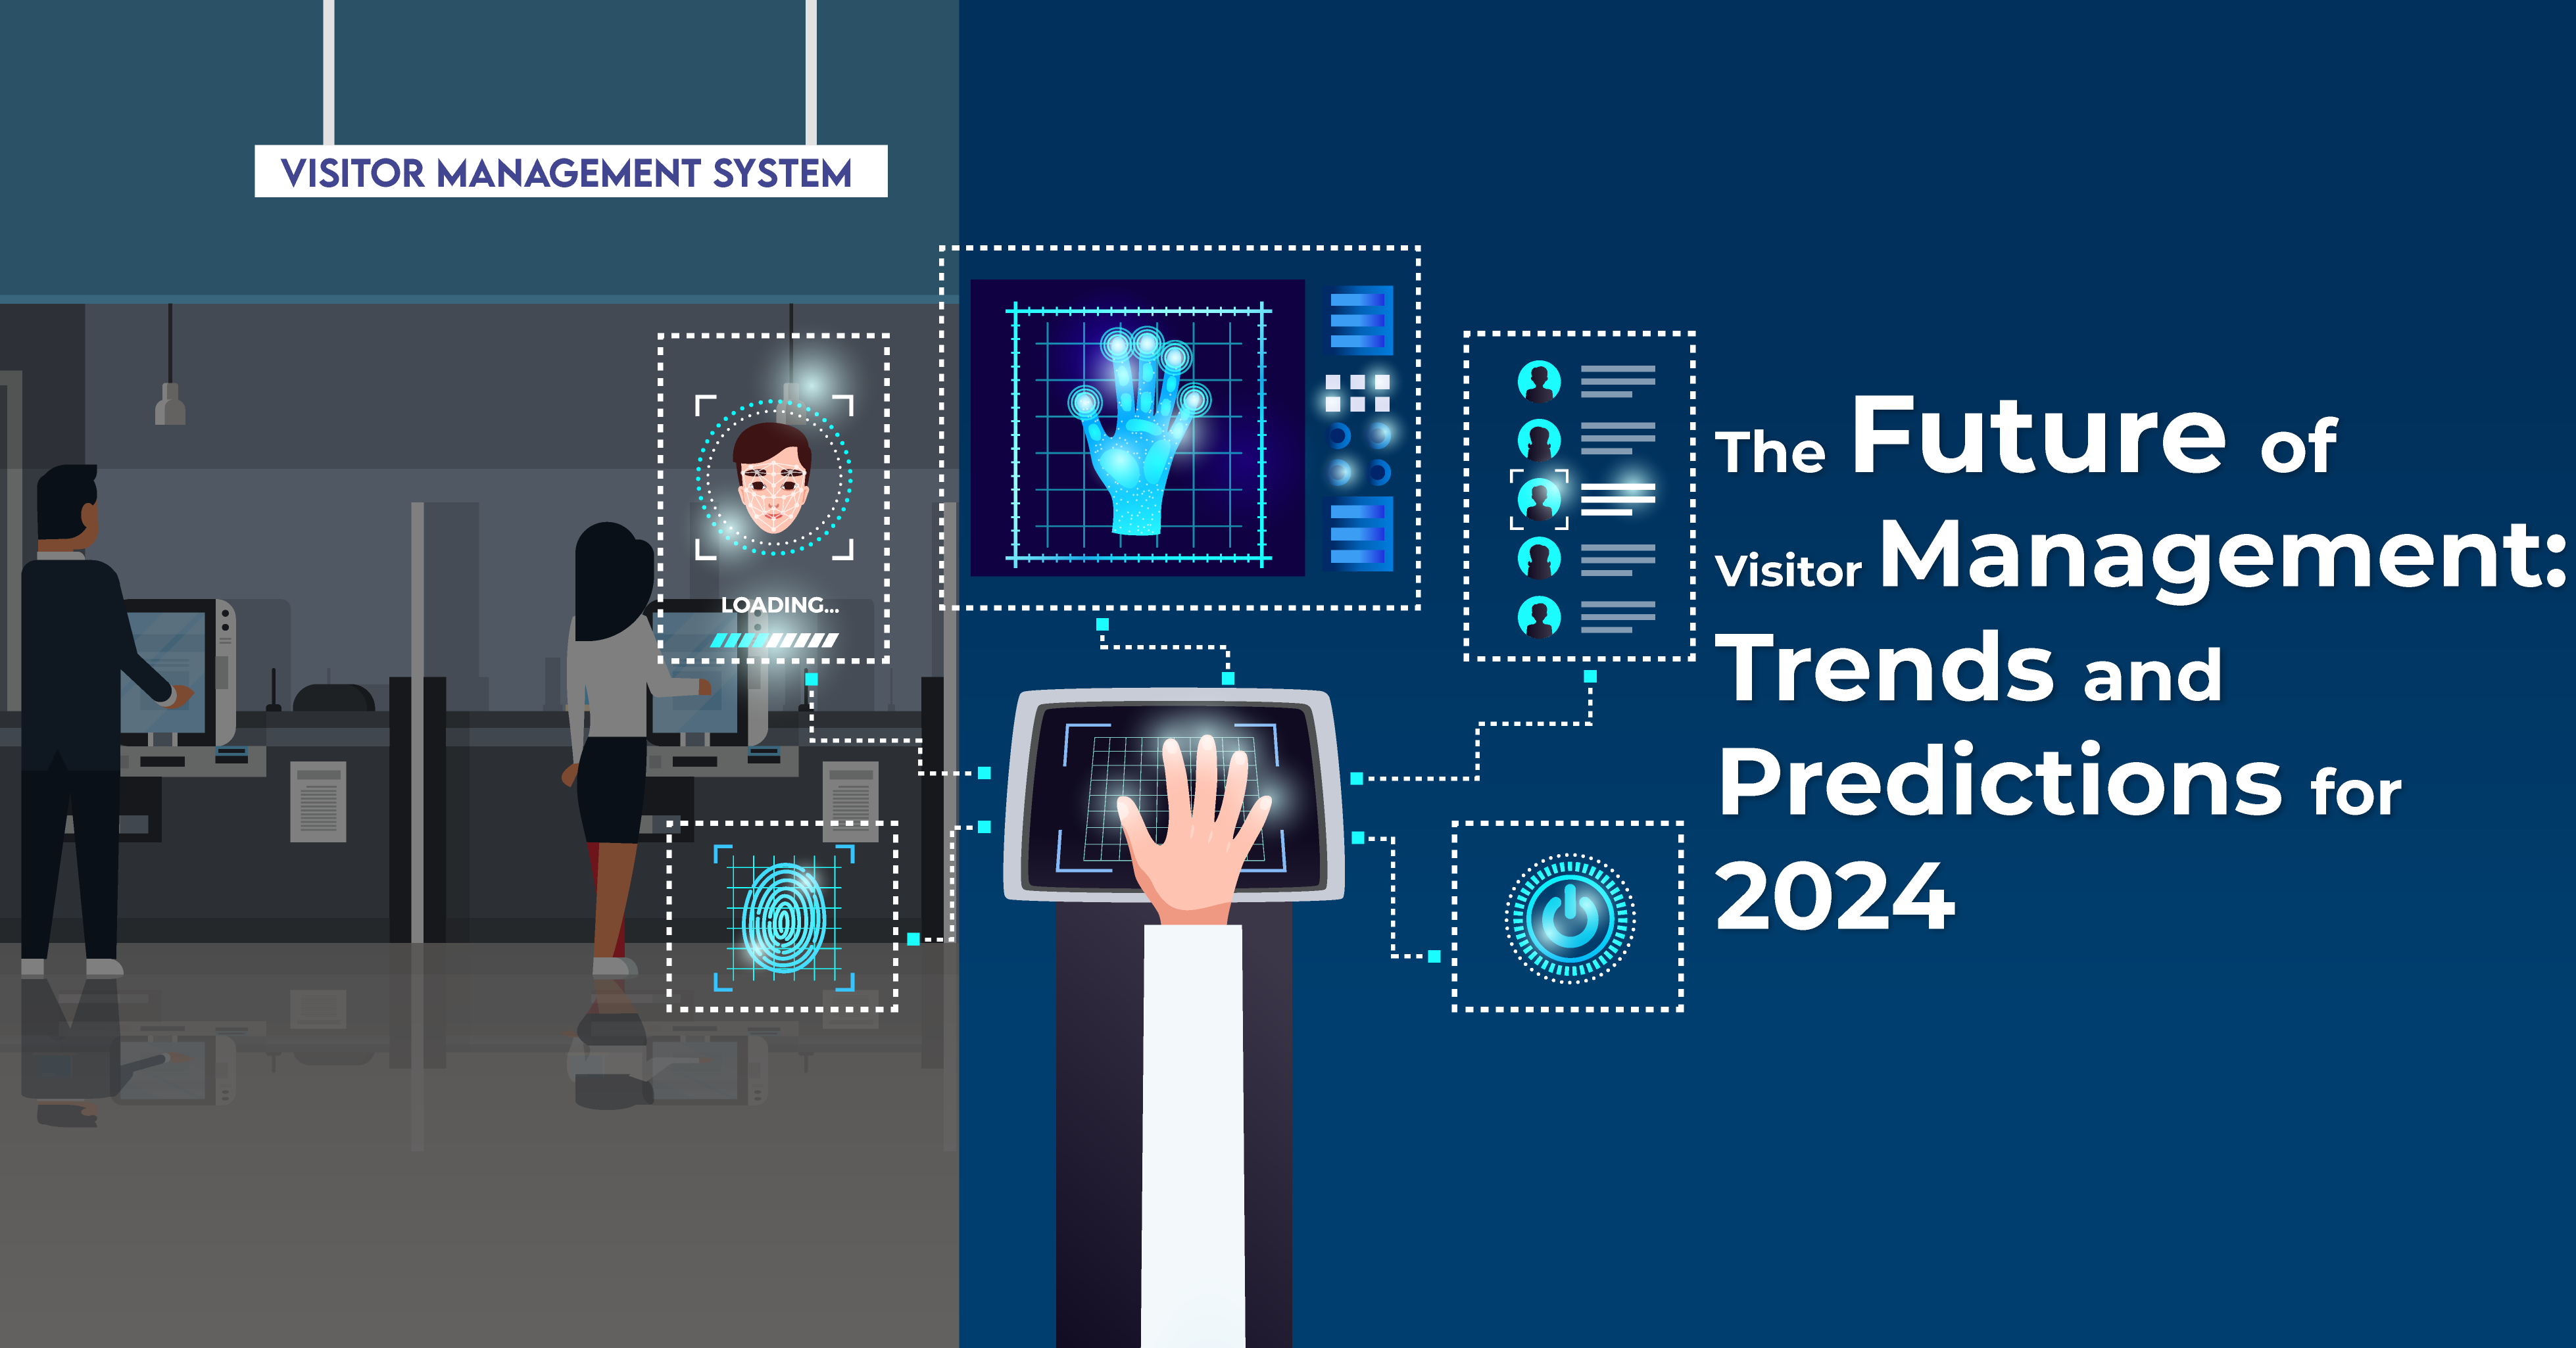 The Future of Visitor Management: Trends and Predictions for 2024